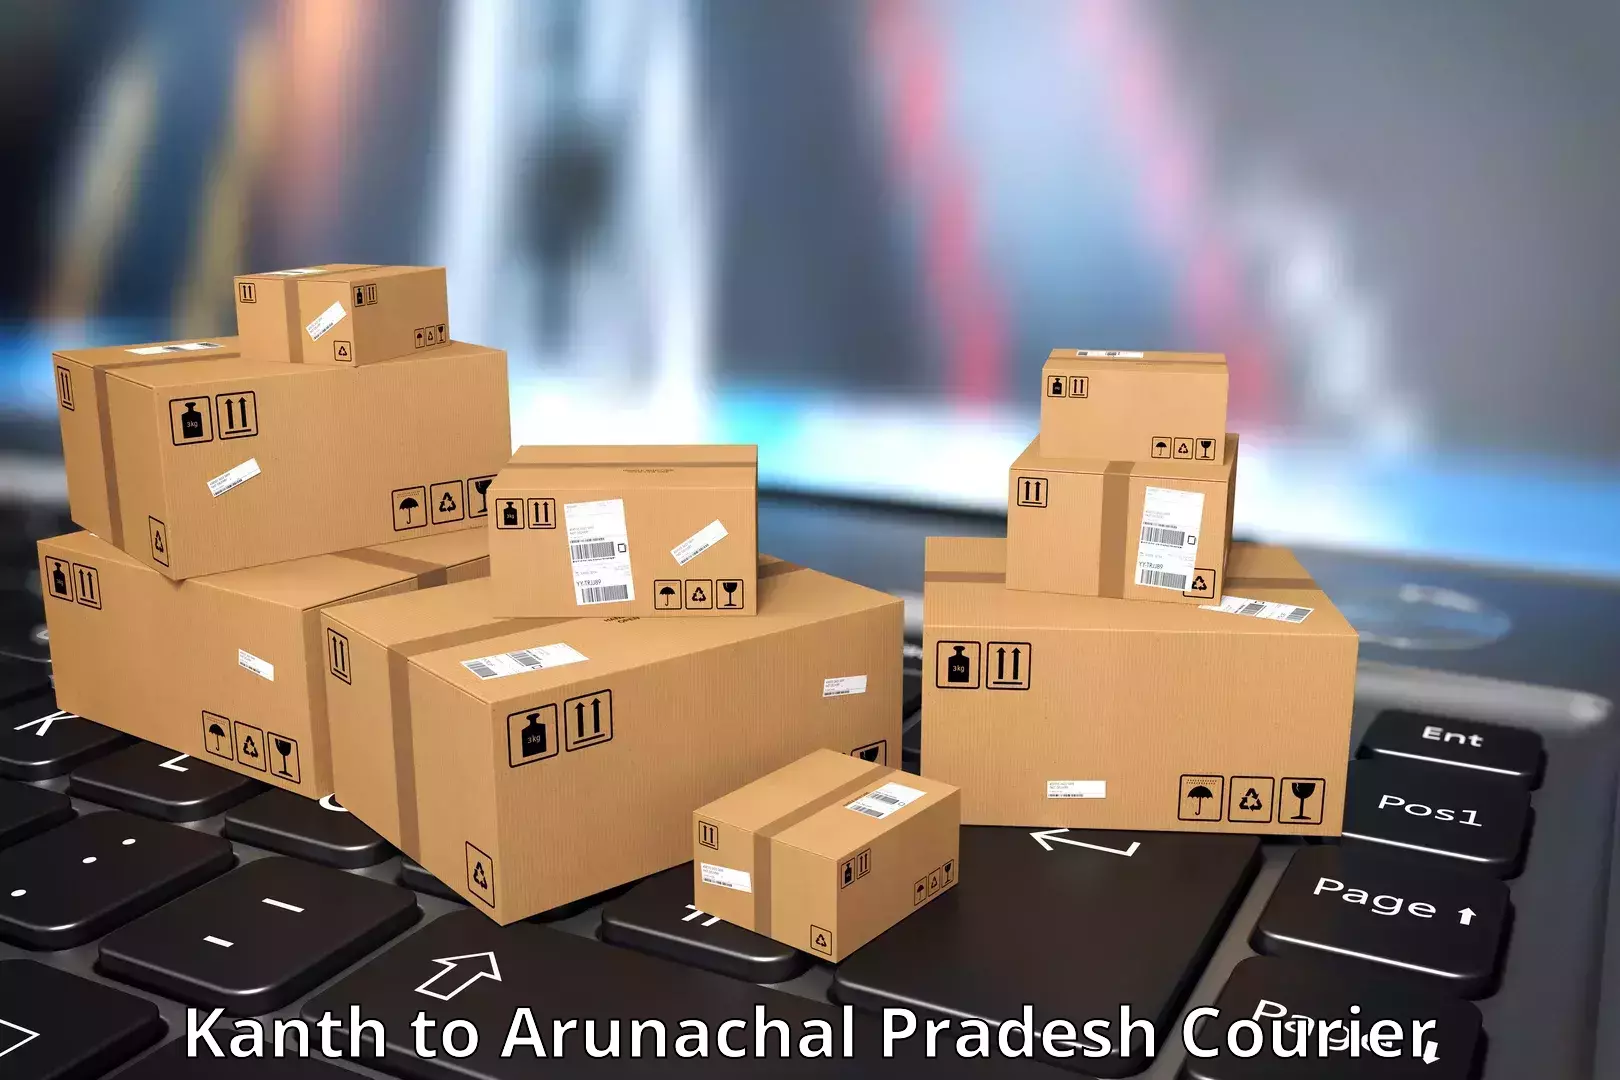 Express delivery capabilities Kanth to Deomali